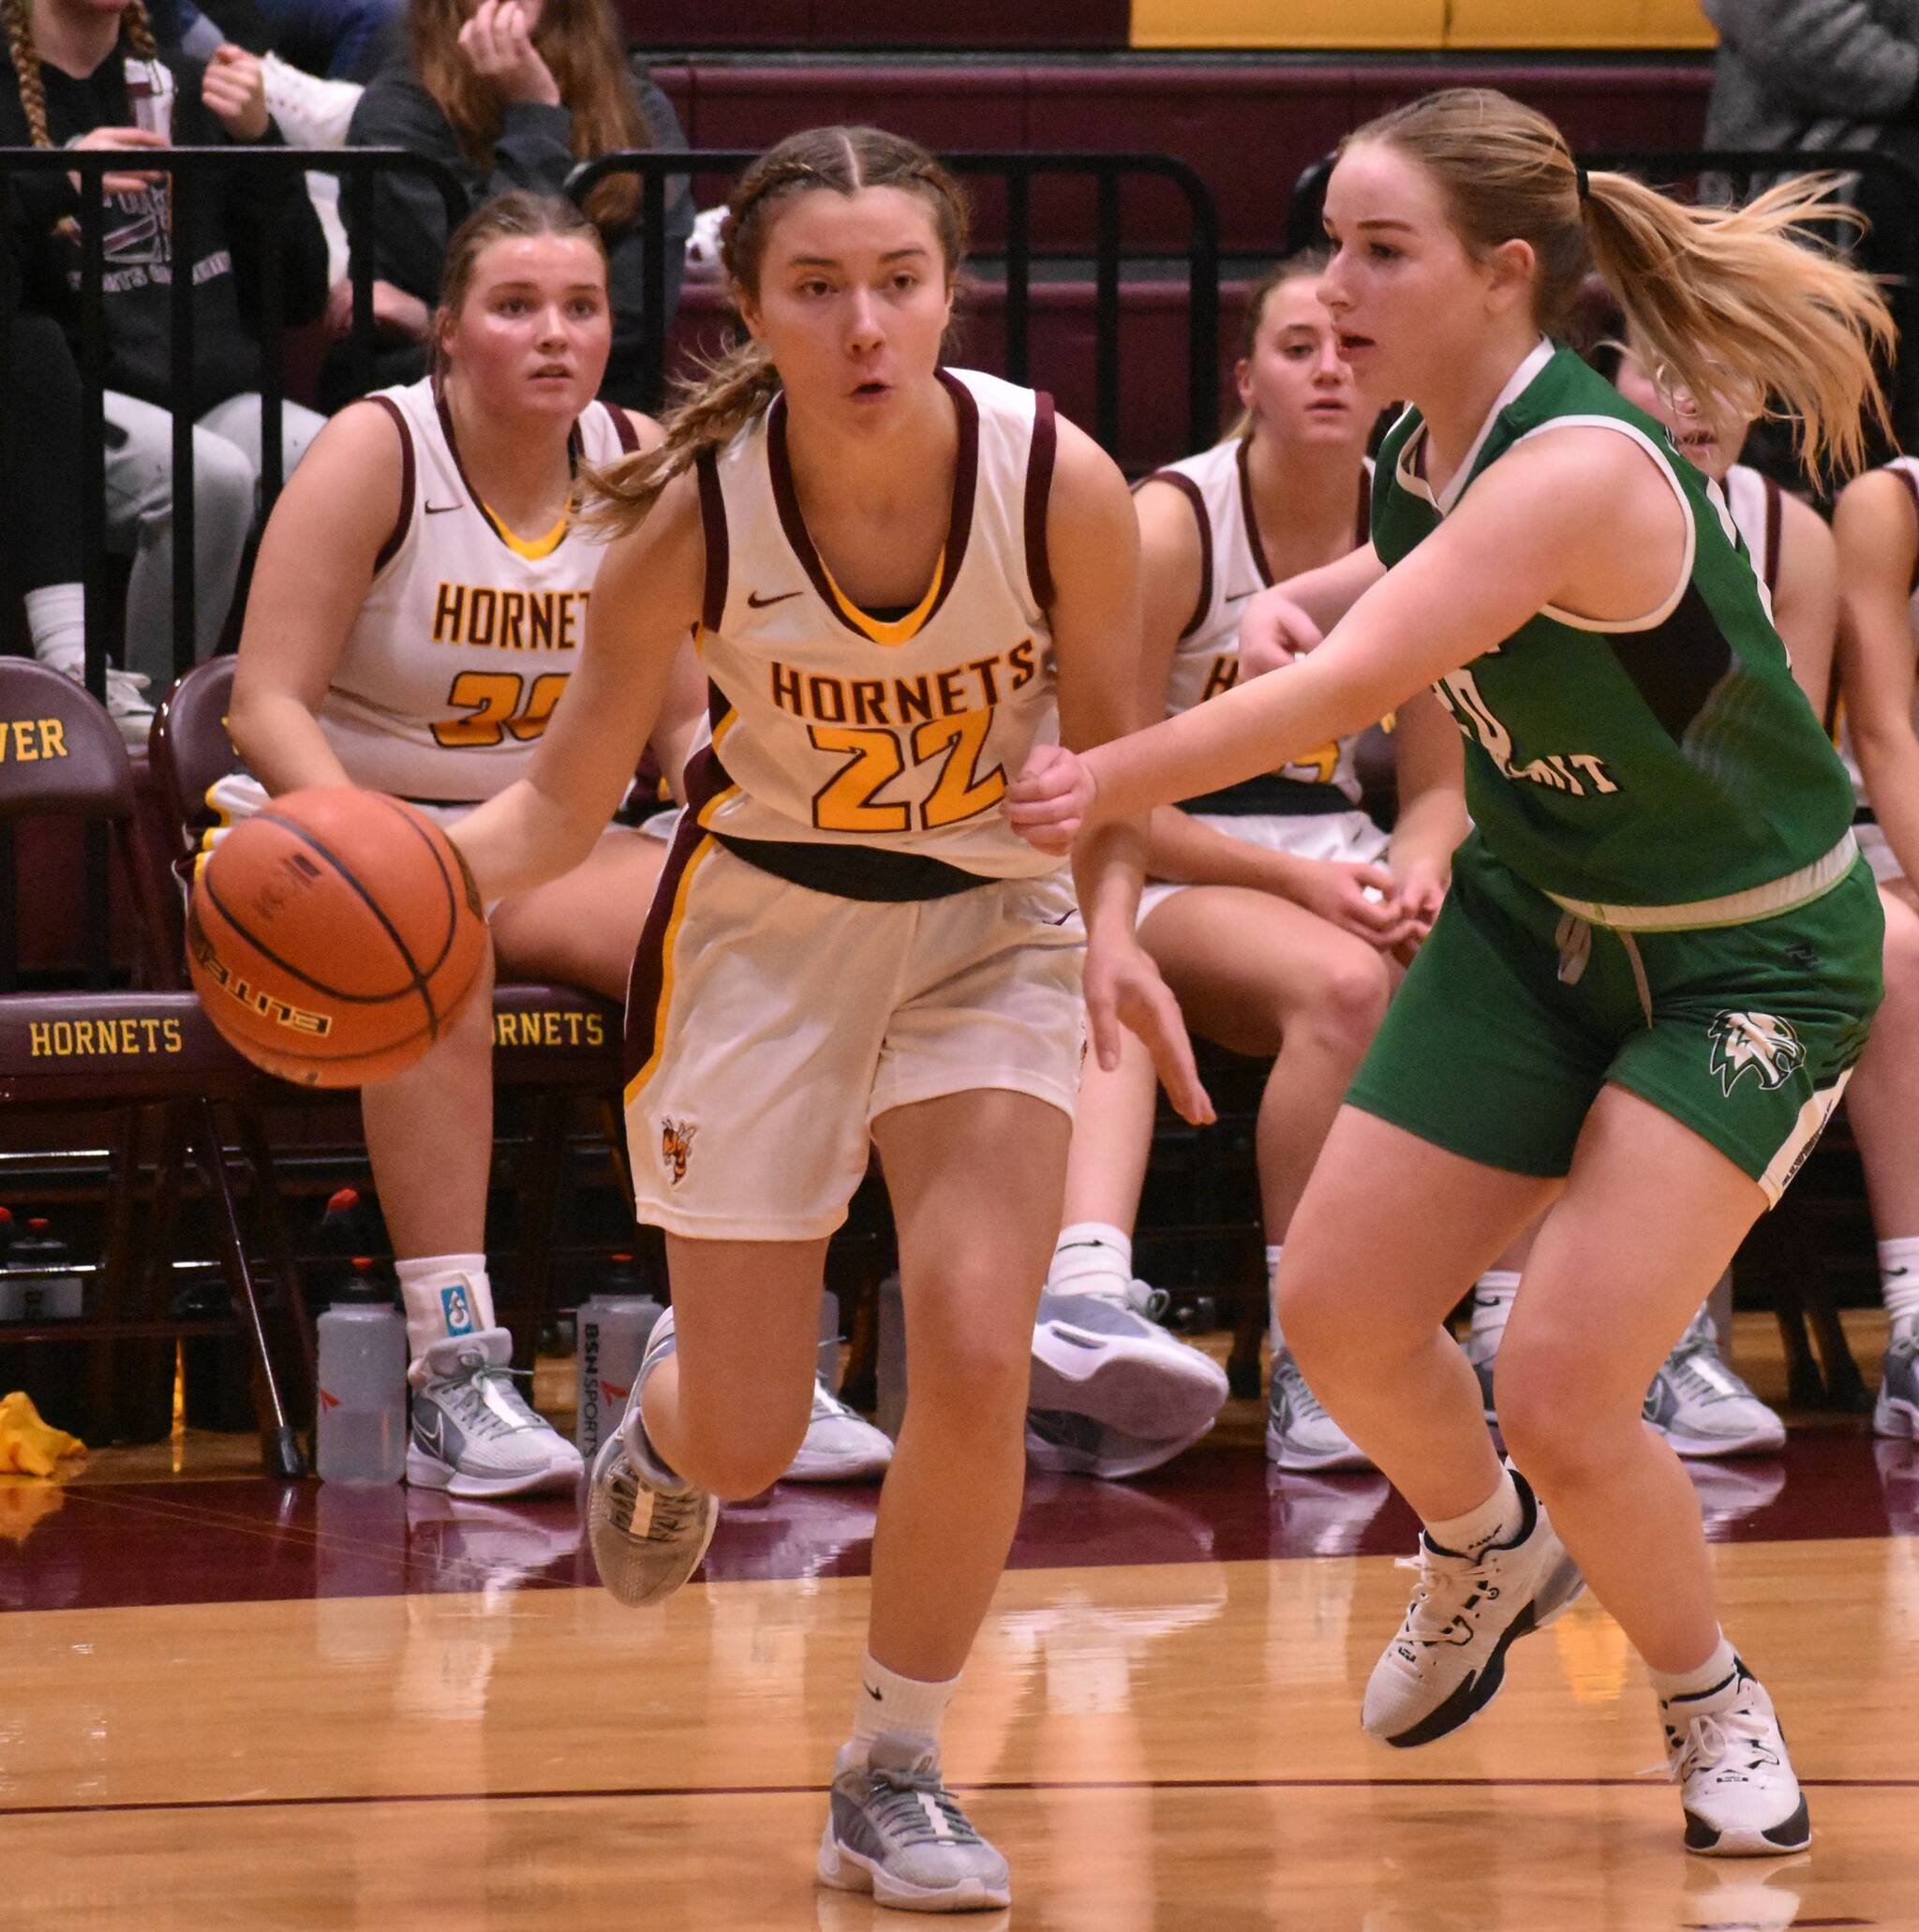 Maggee Schmitz was a force during her November 30 high school debut. The White River freshman scored 20 points to spark the Hornets’ lopsided victory November 30 against Utah’s South Summit High. Photo by Kevin Hanson